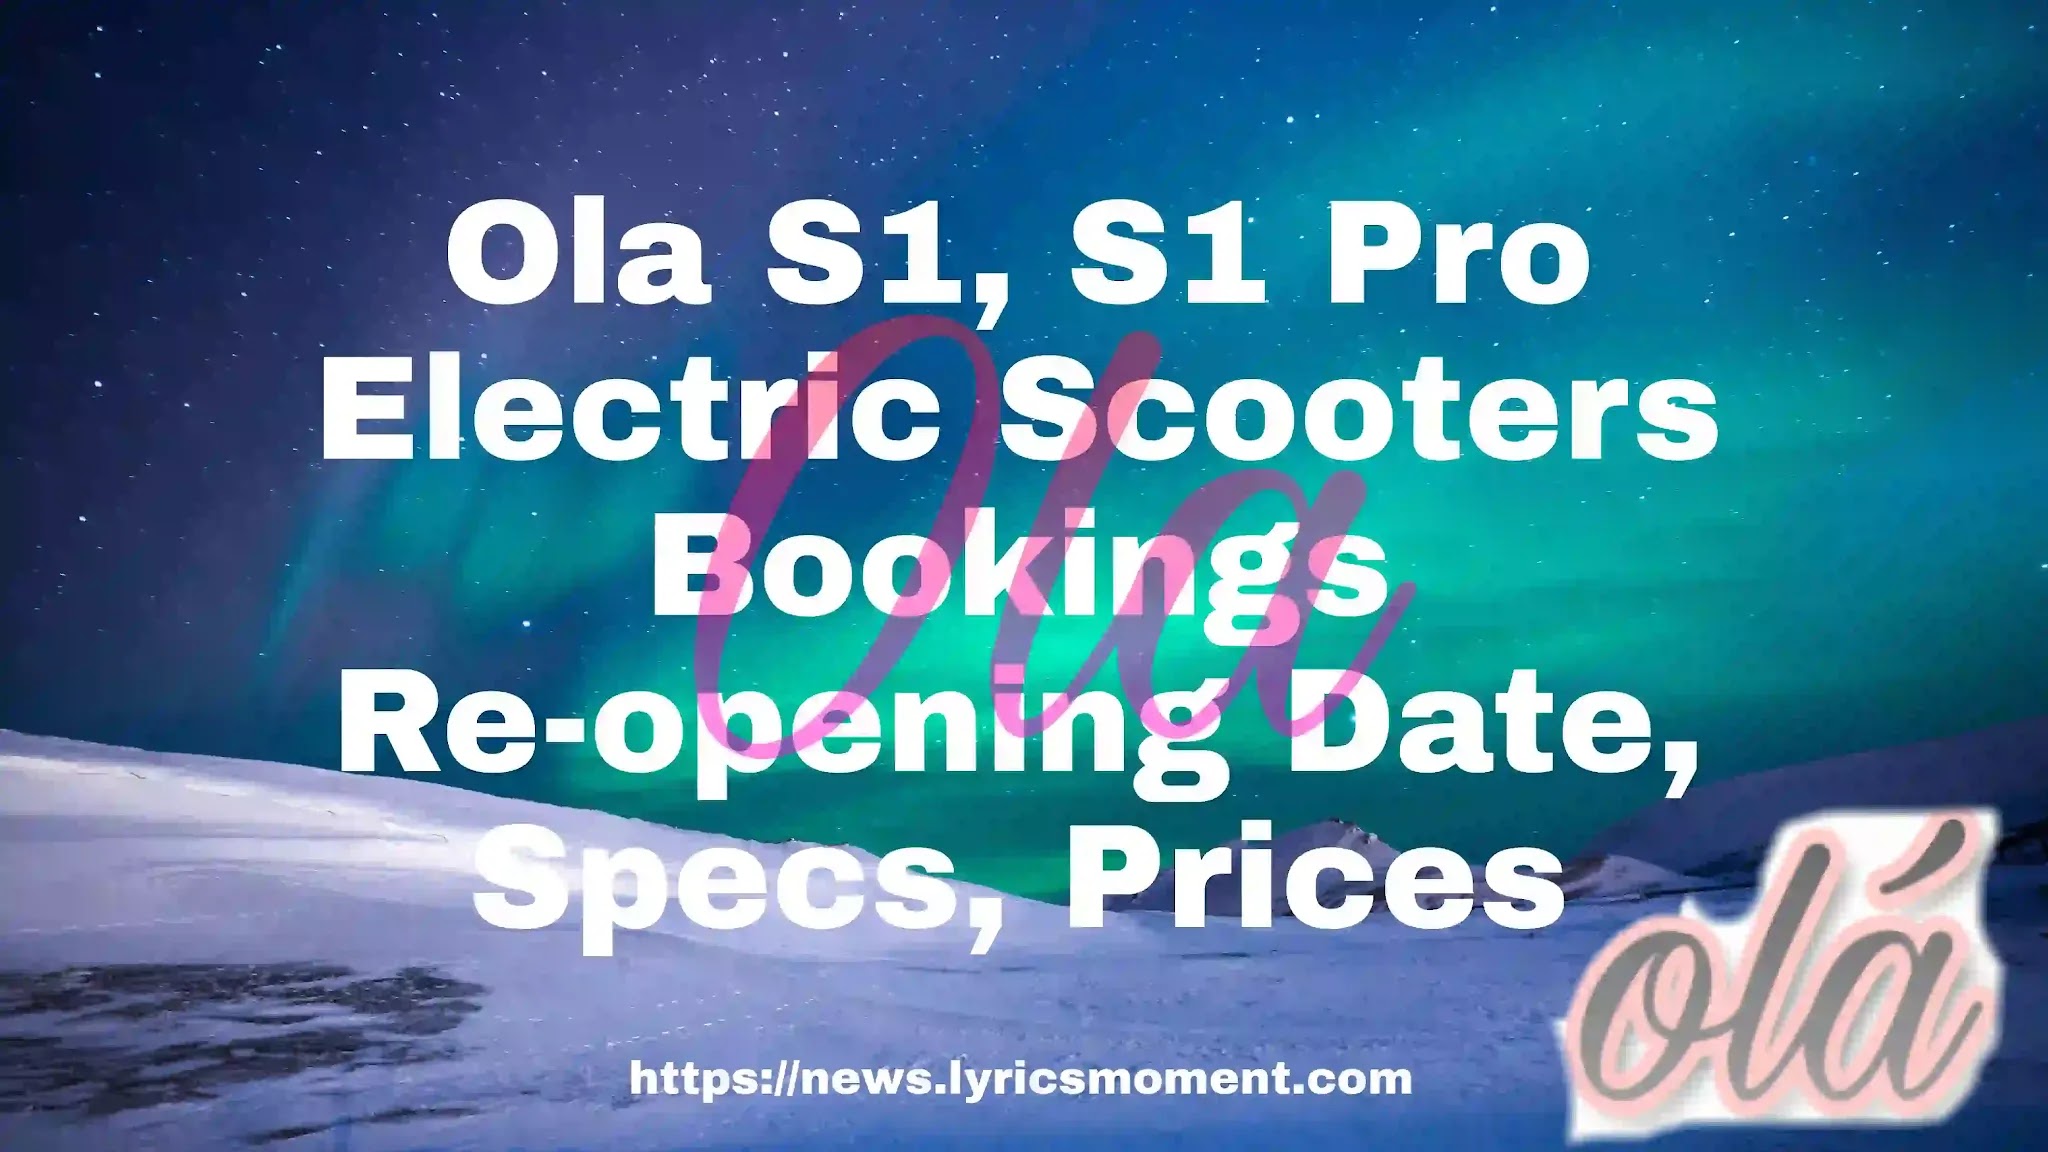 Ola S1, S1 Pro Electric Scooters Bookings Re-opening Date, Specs, Prices